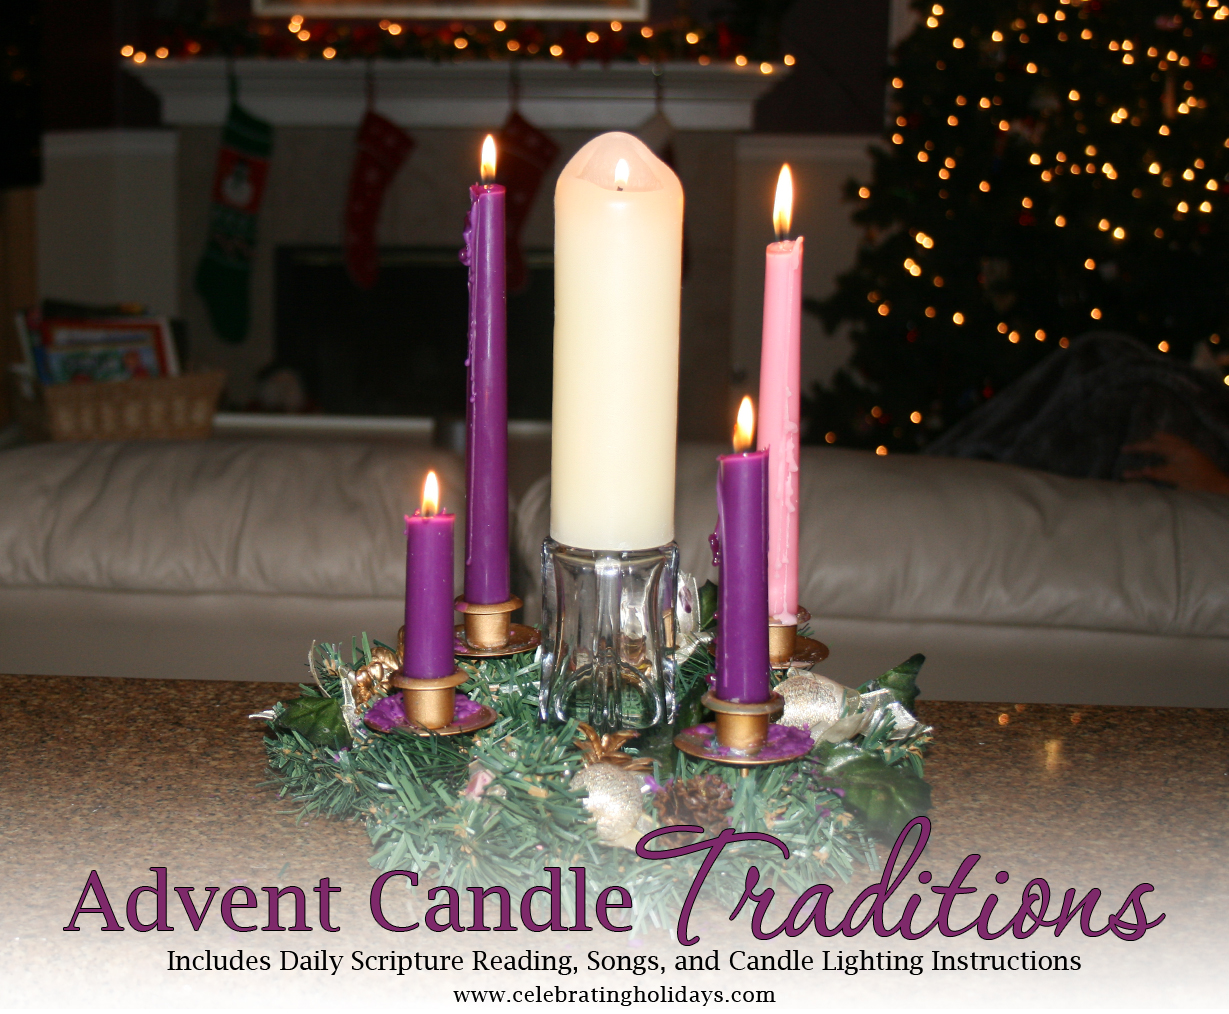 Advent Wreath Traditions